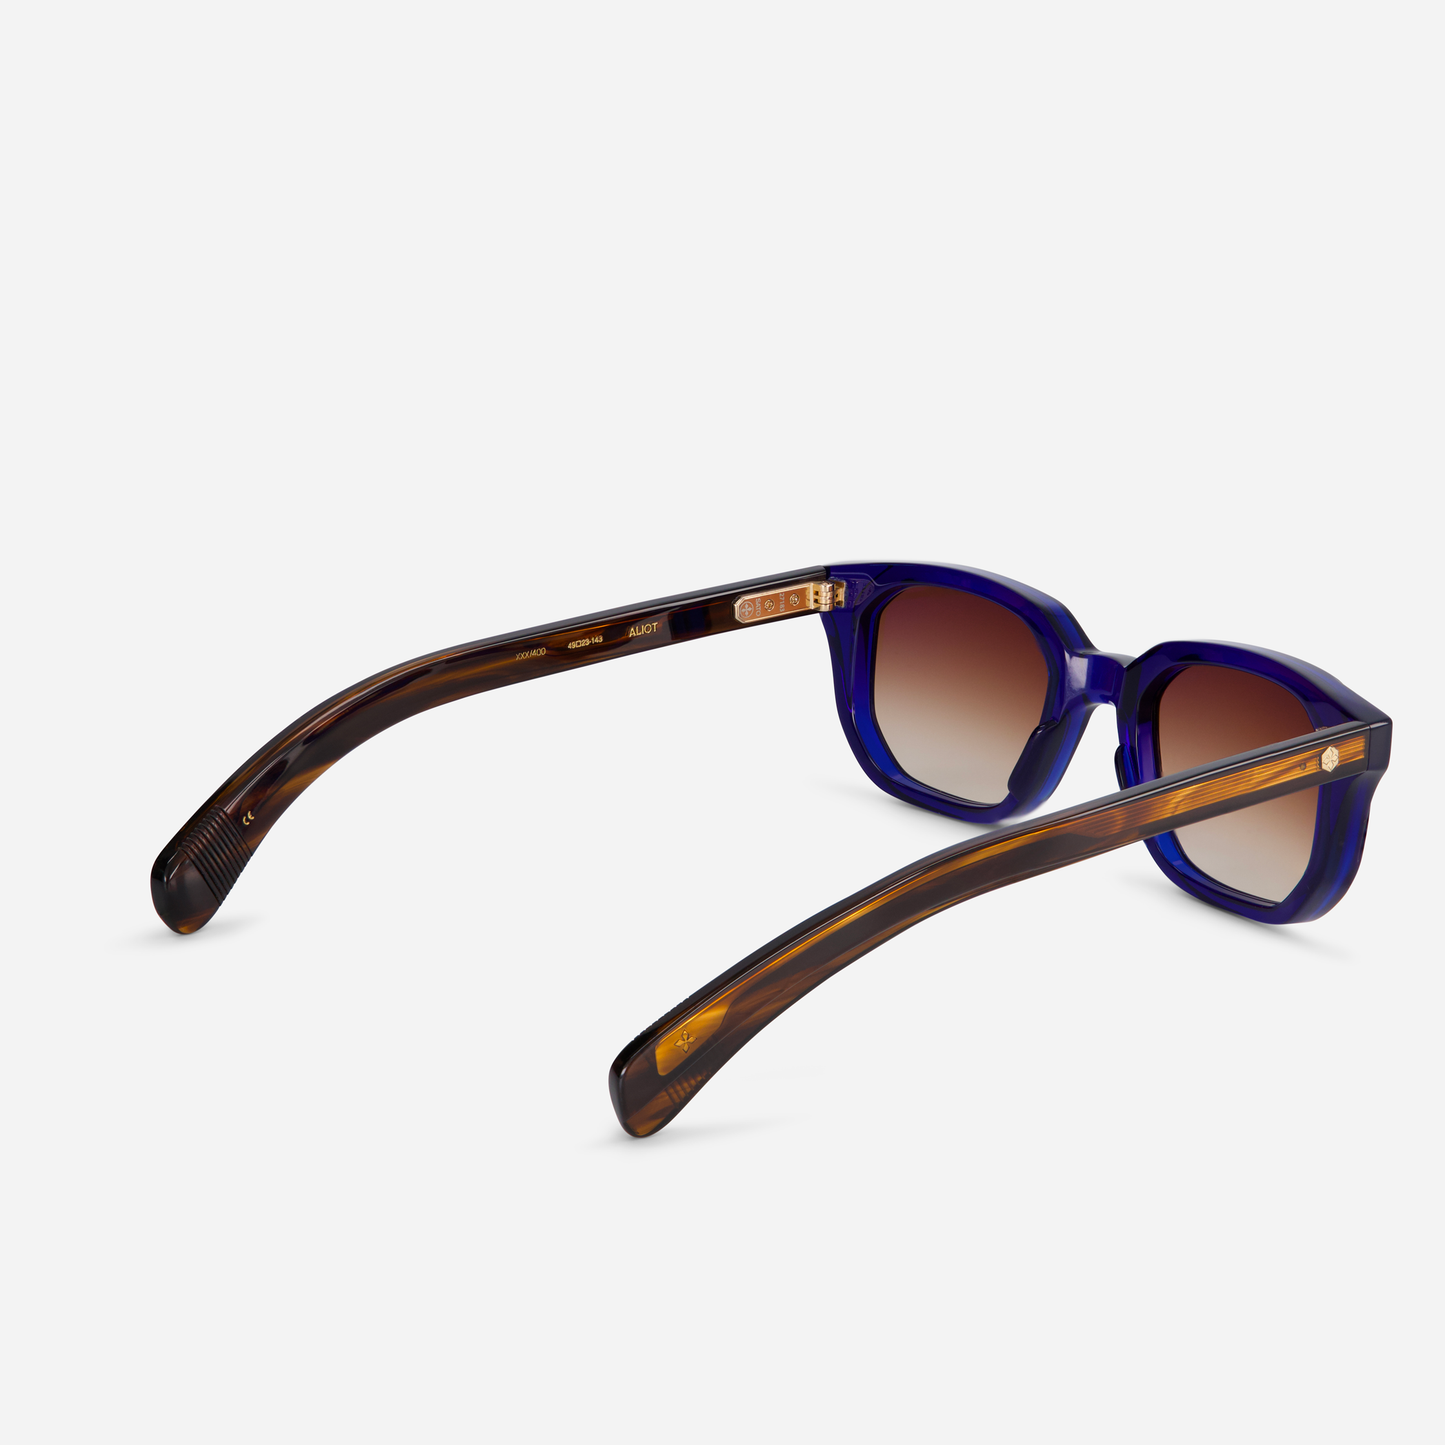 A Touch of Luxury: The Sato Aliot Midnight Blue with Gradient Brown Lenses - your gateway to refined eyewear.